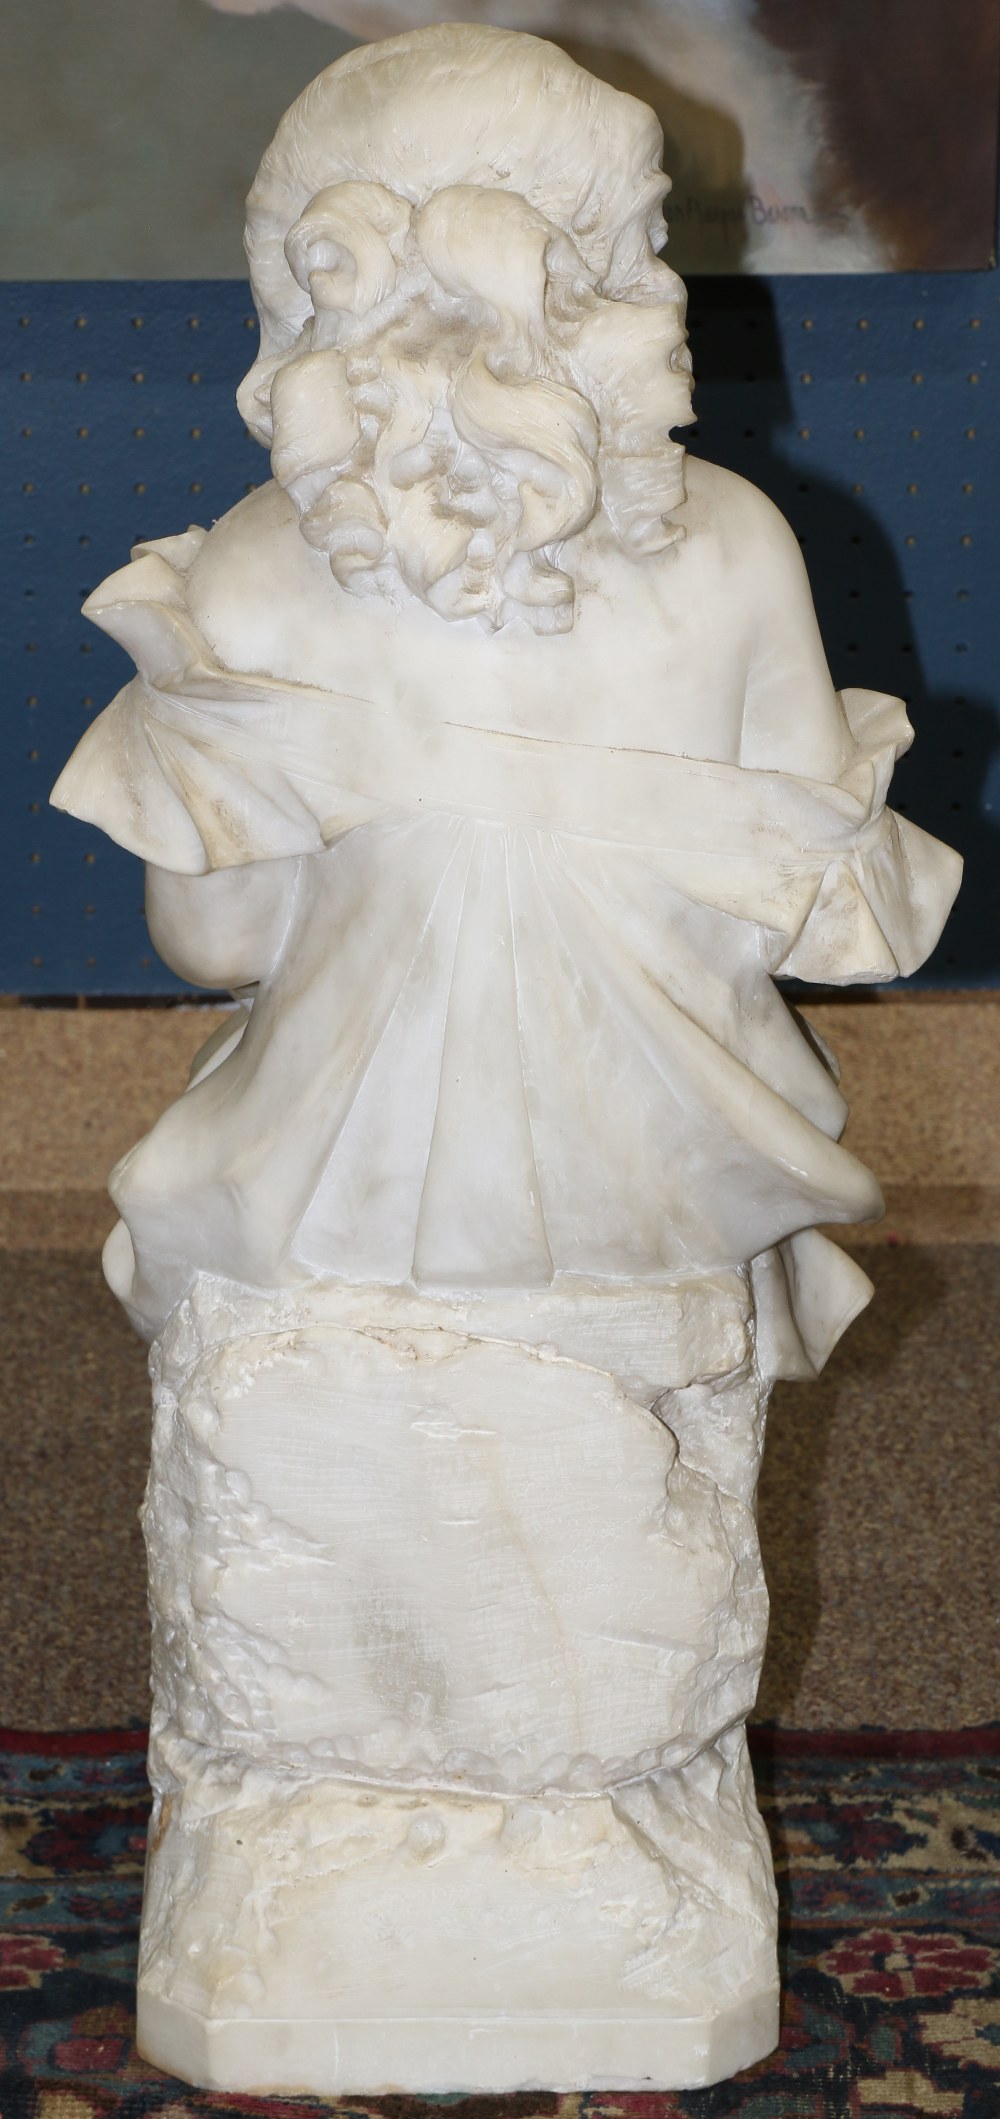 Cristofor Vicari (Italian, 1846-1913) marble figural sculpture, depicting a young girl reading, - Image 4 of 5